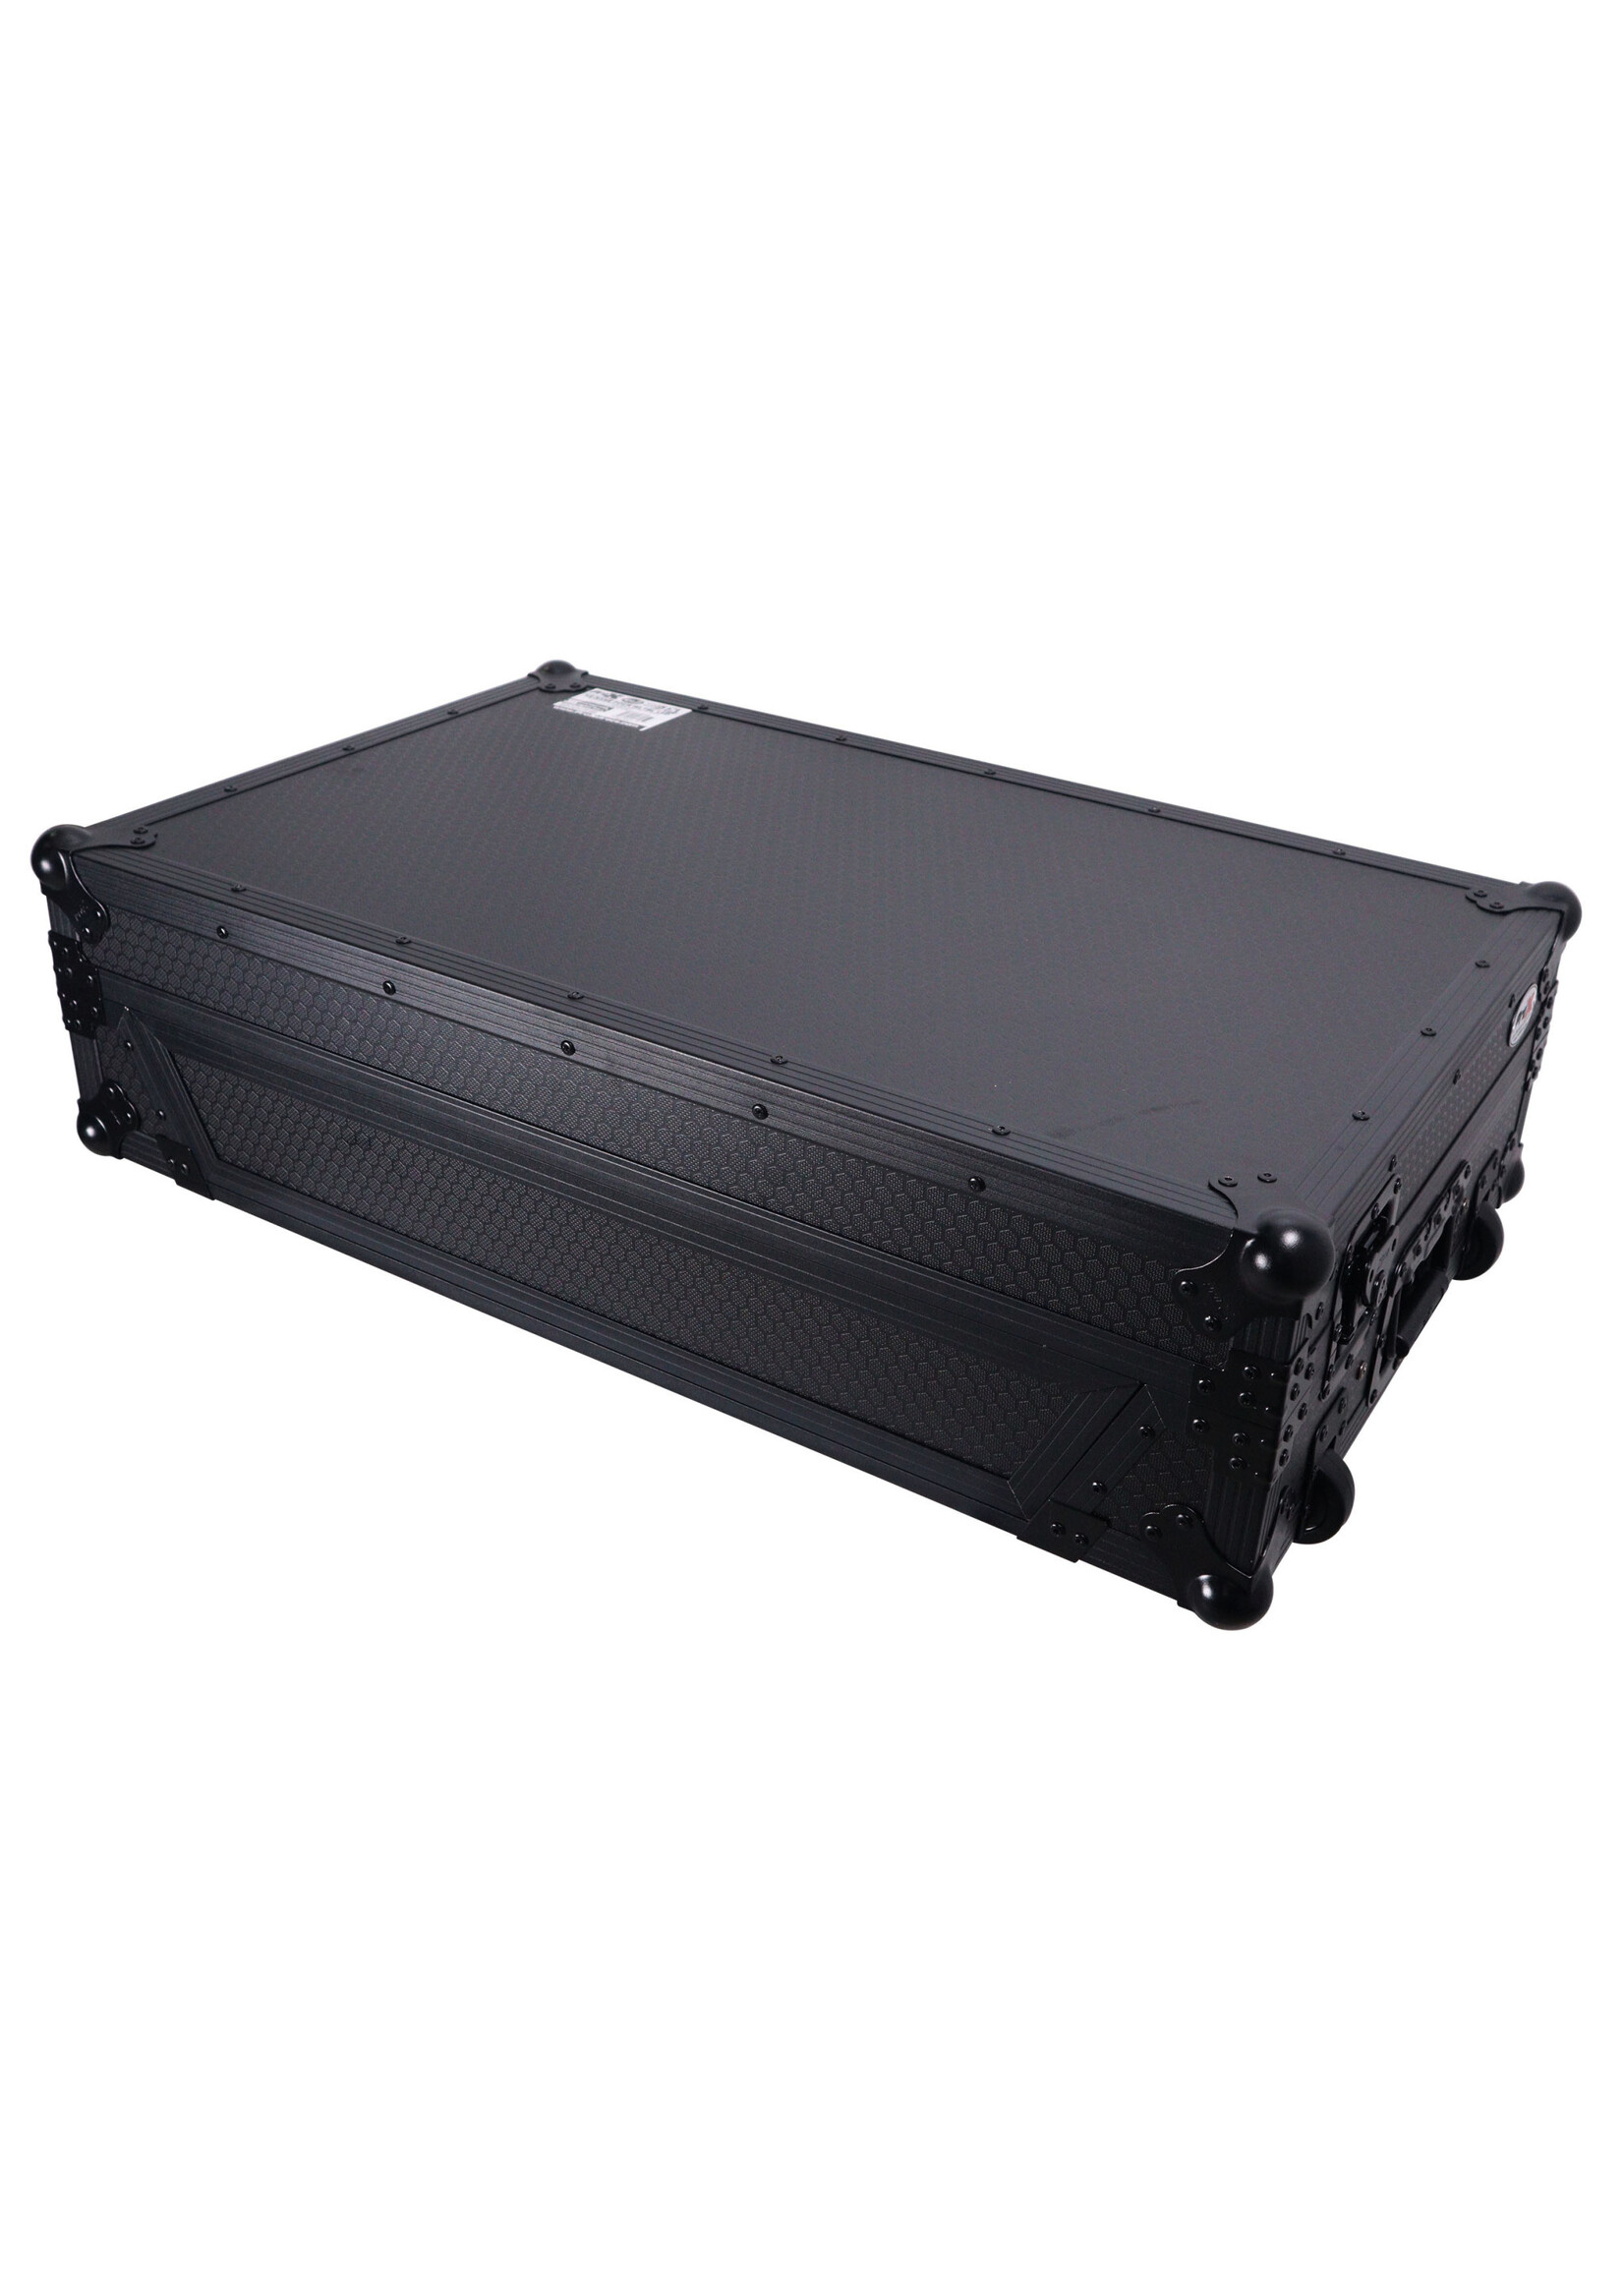 ProX ATA Flight Style Road Case For RANE Four DJ Controller with Laptop Shelf 1U Rack Space LED and Wheels - Black Finish